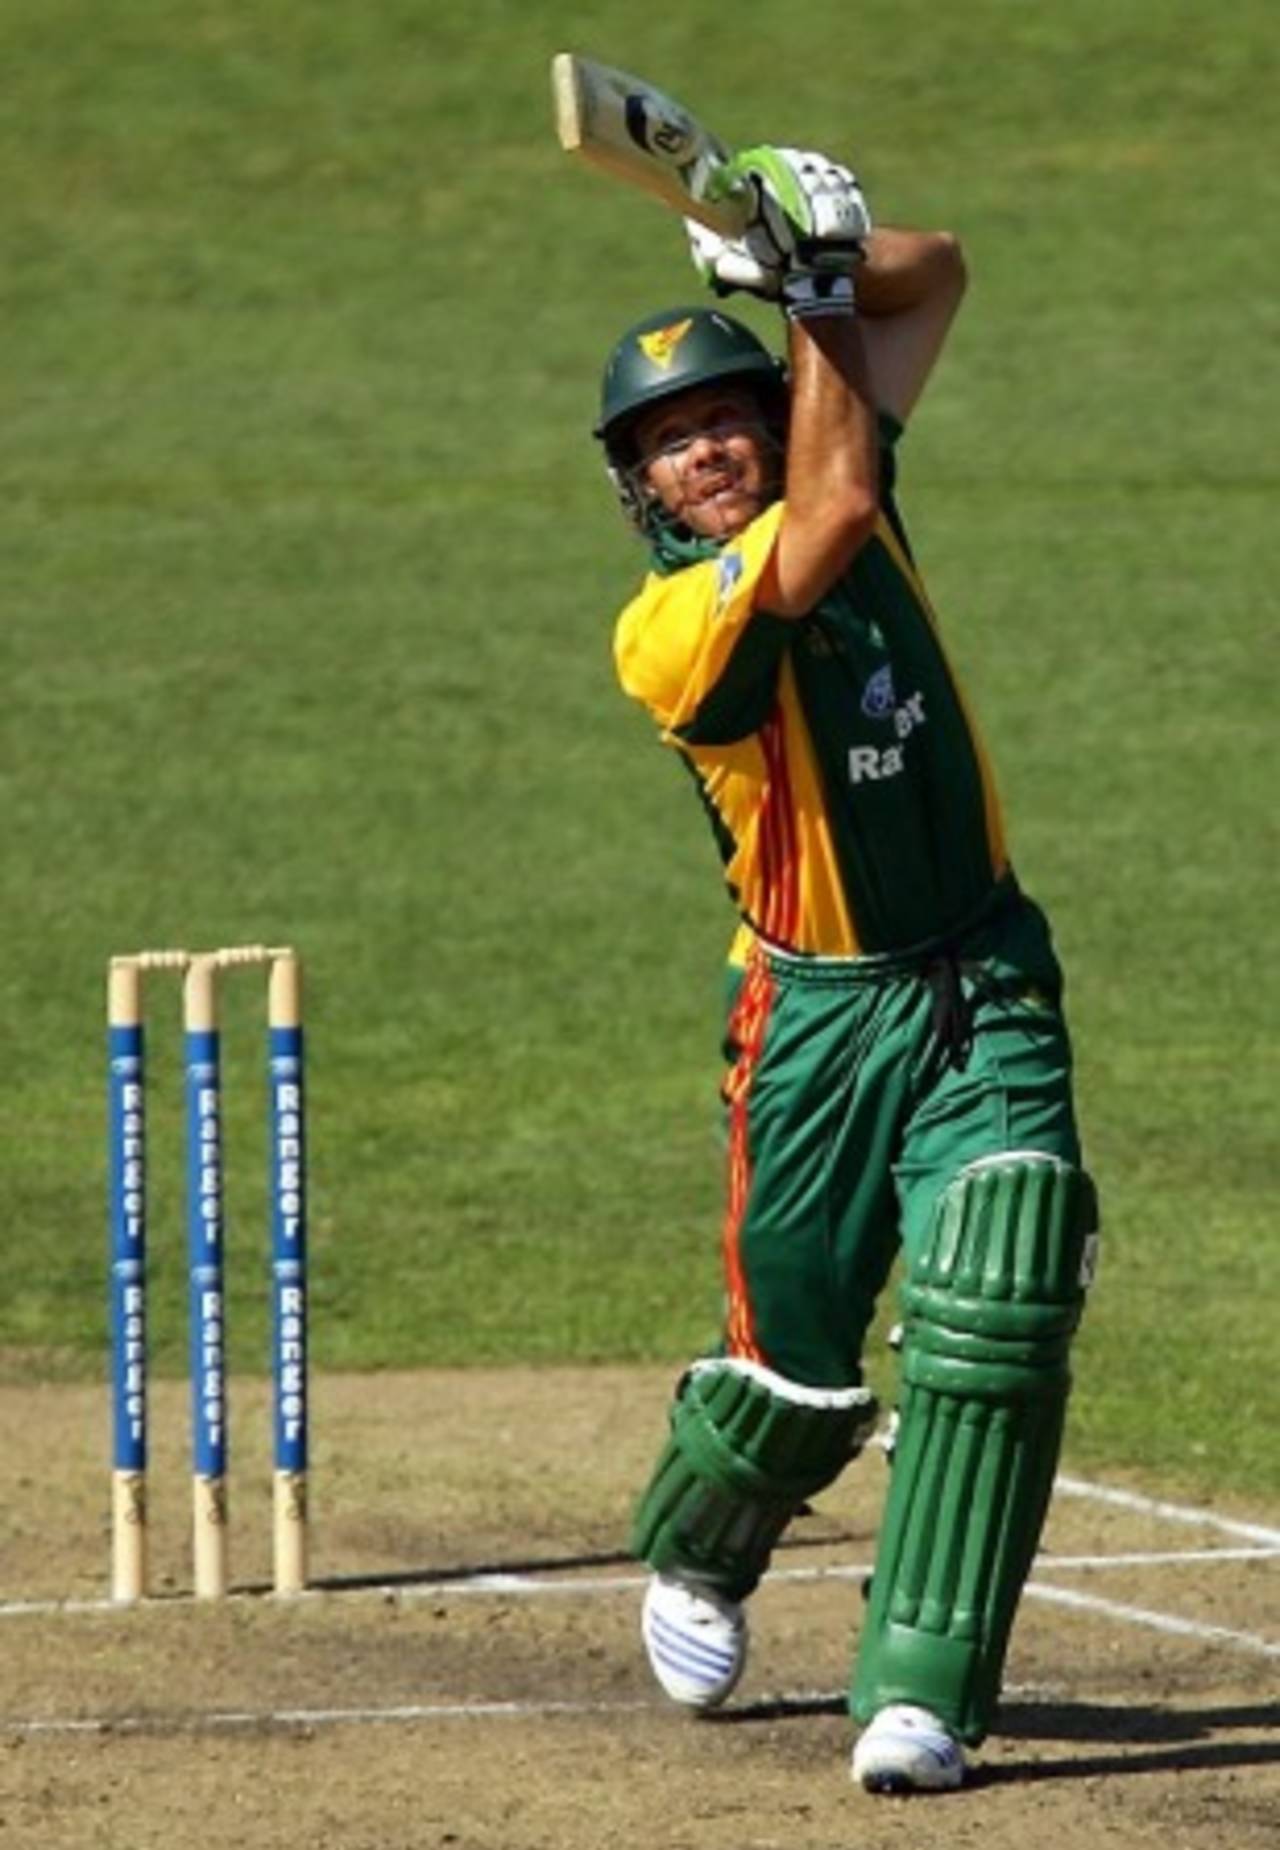 Ricky Ponting lofts over cover during his unbeaten 111, New South Wales v Tasmania, FR Cup, Sydney, November 25, 2007